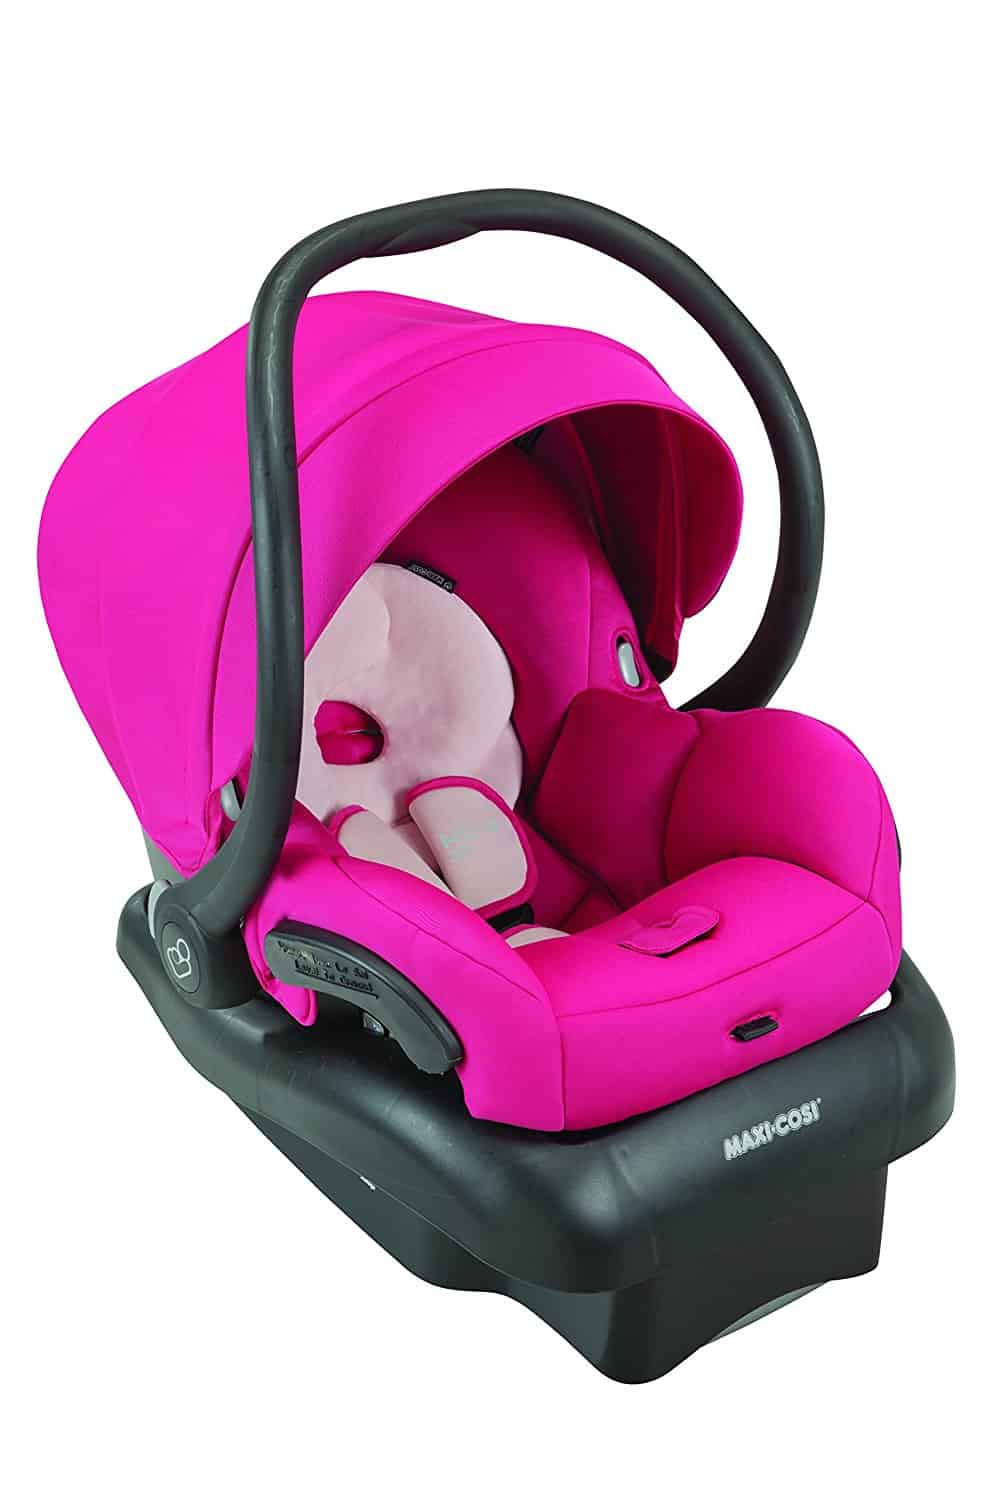 Infant Car Seat Review Maxi Cosi Mico 30 Max Baby Bargains - Maxi Cosi Mico Car Seat Weight Limit